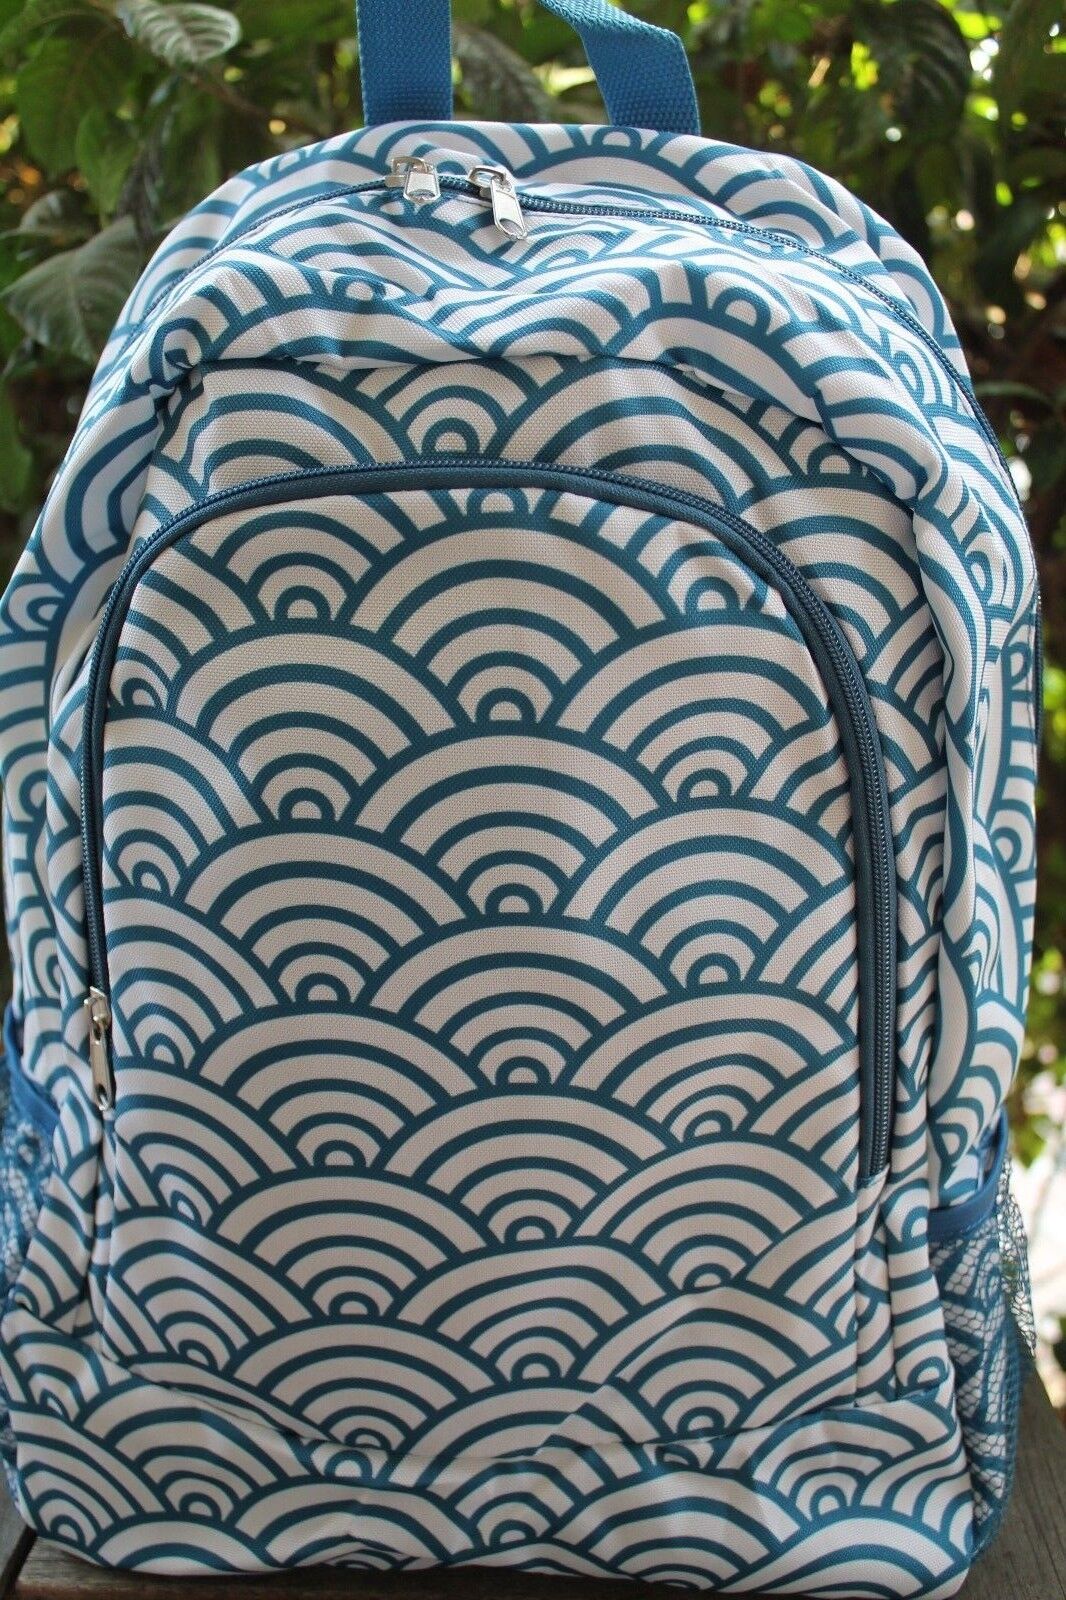 Full Size Campus Blue WAVES BACKPACK School Book Bag Travel Tote 17" NEW